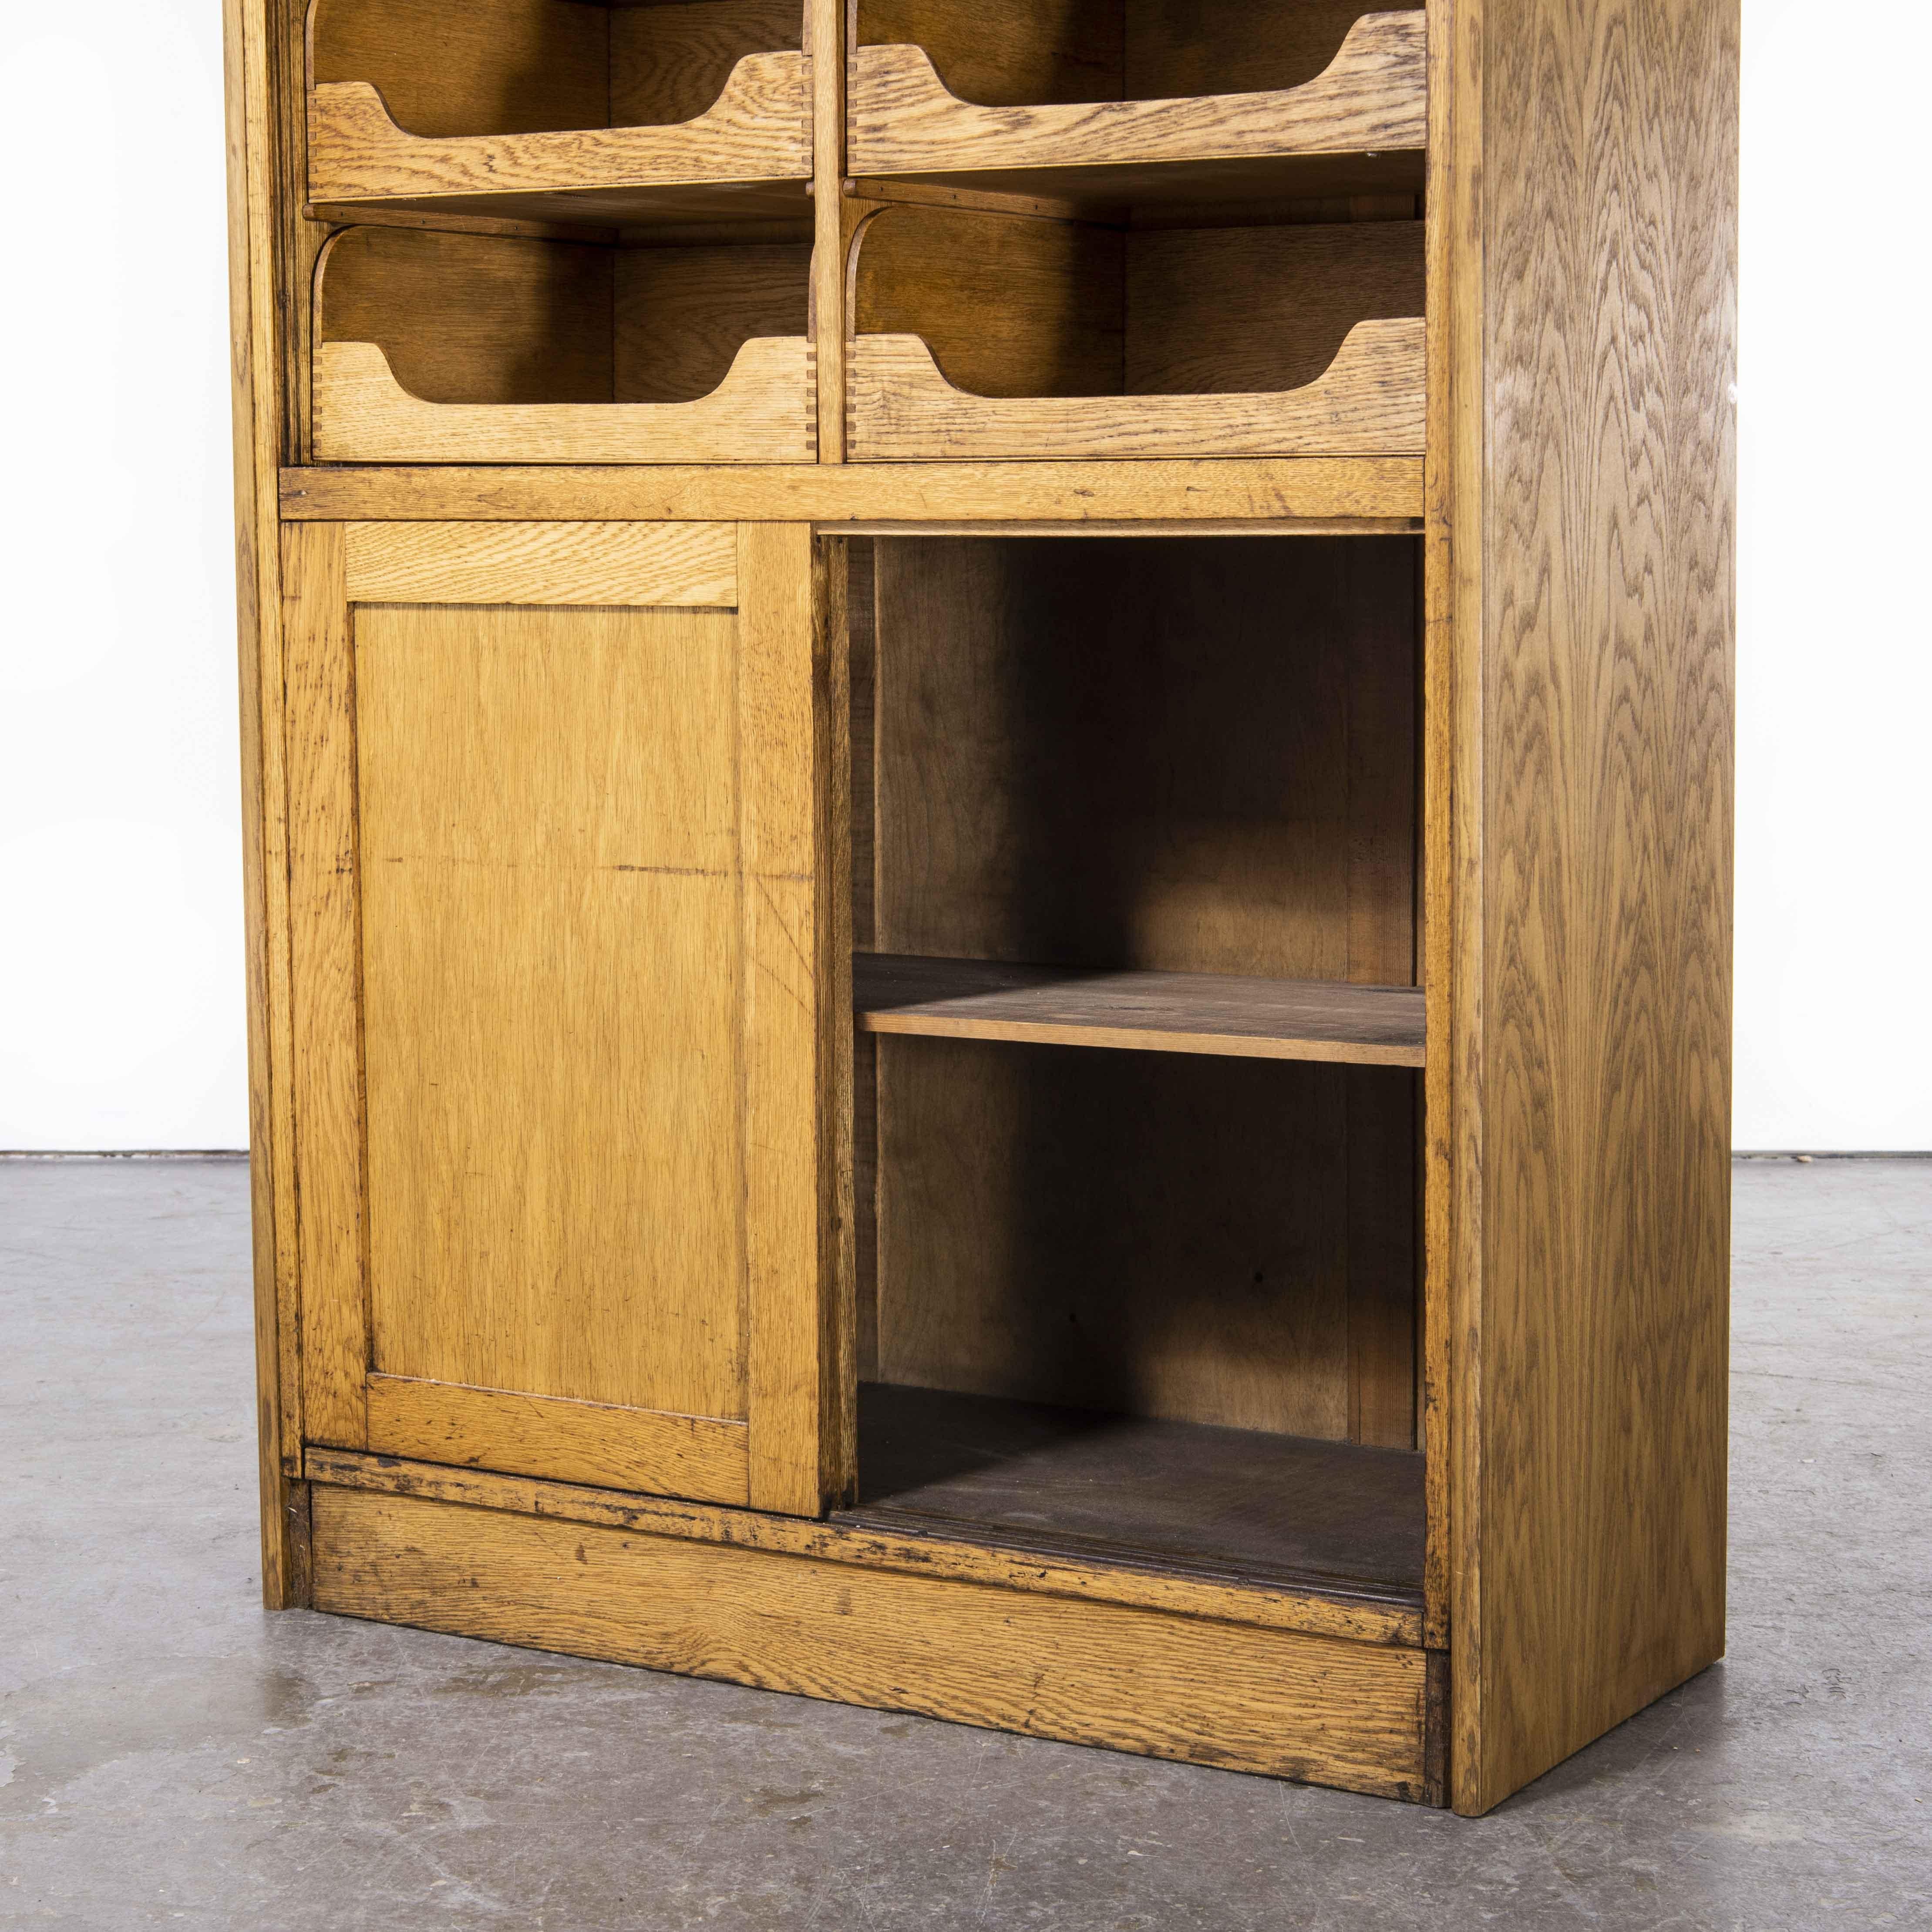 Oak 1950's Tall English Haberdashery Shelved Cabinet, Sixteen Drawers 'Model 1244.1' For Sale